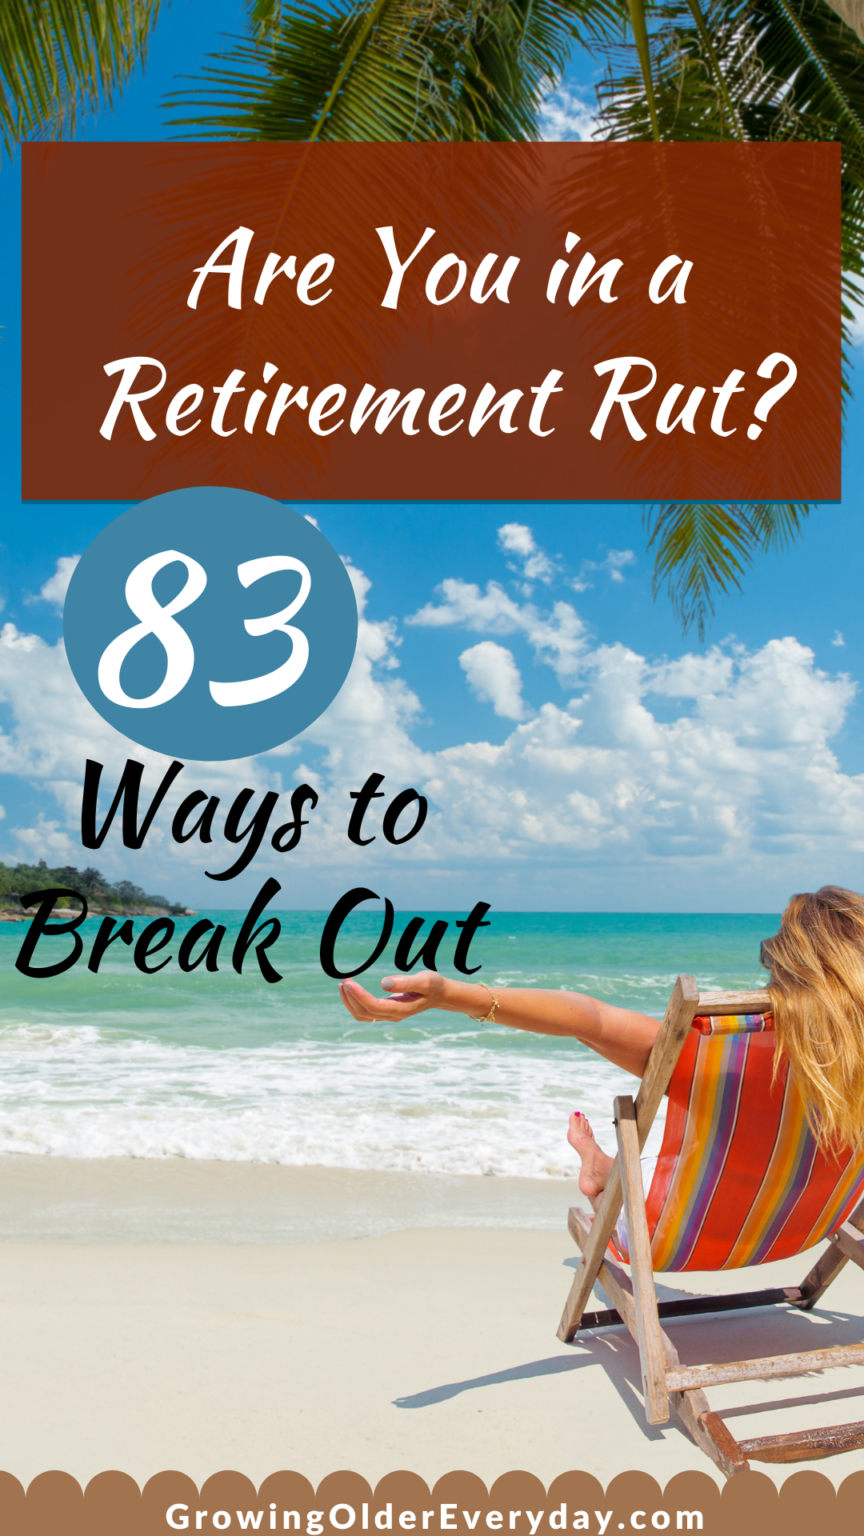 Are you in a Retirement Rut? 83 Ways to Break Out - Growing Older Everyday